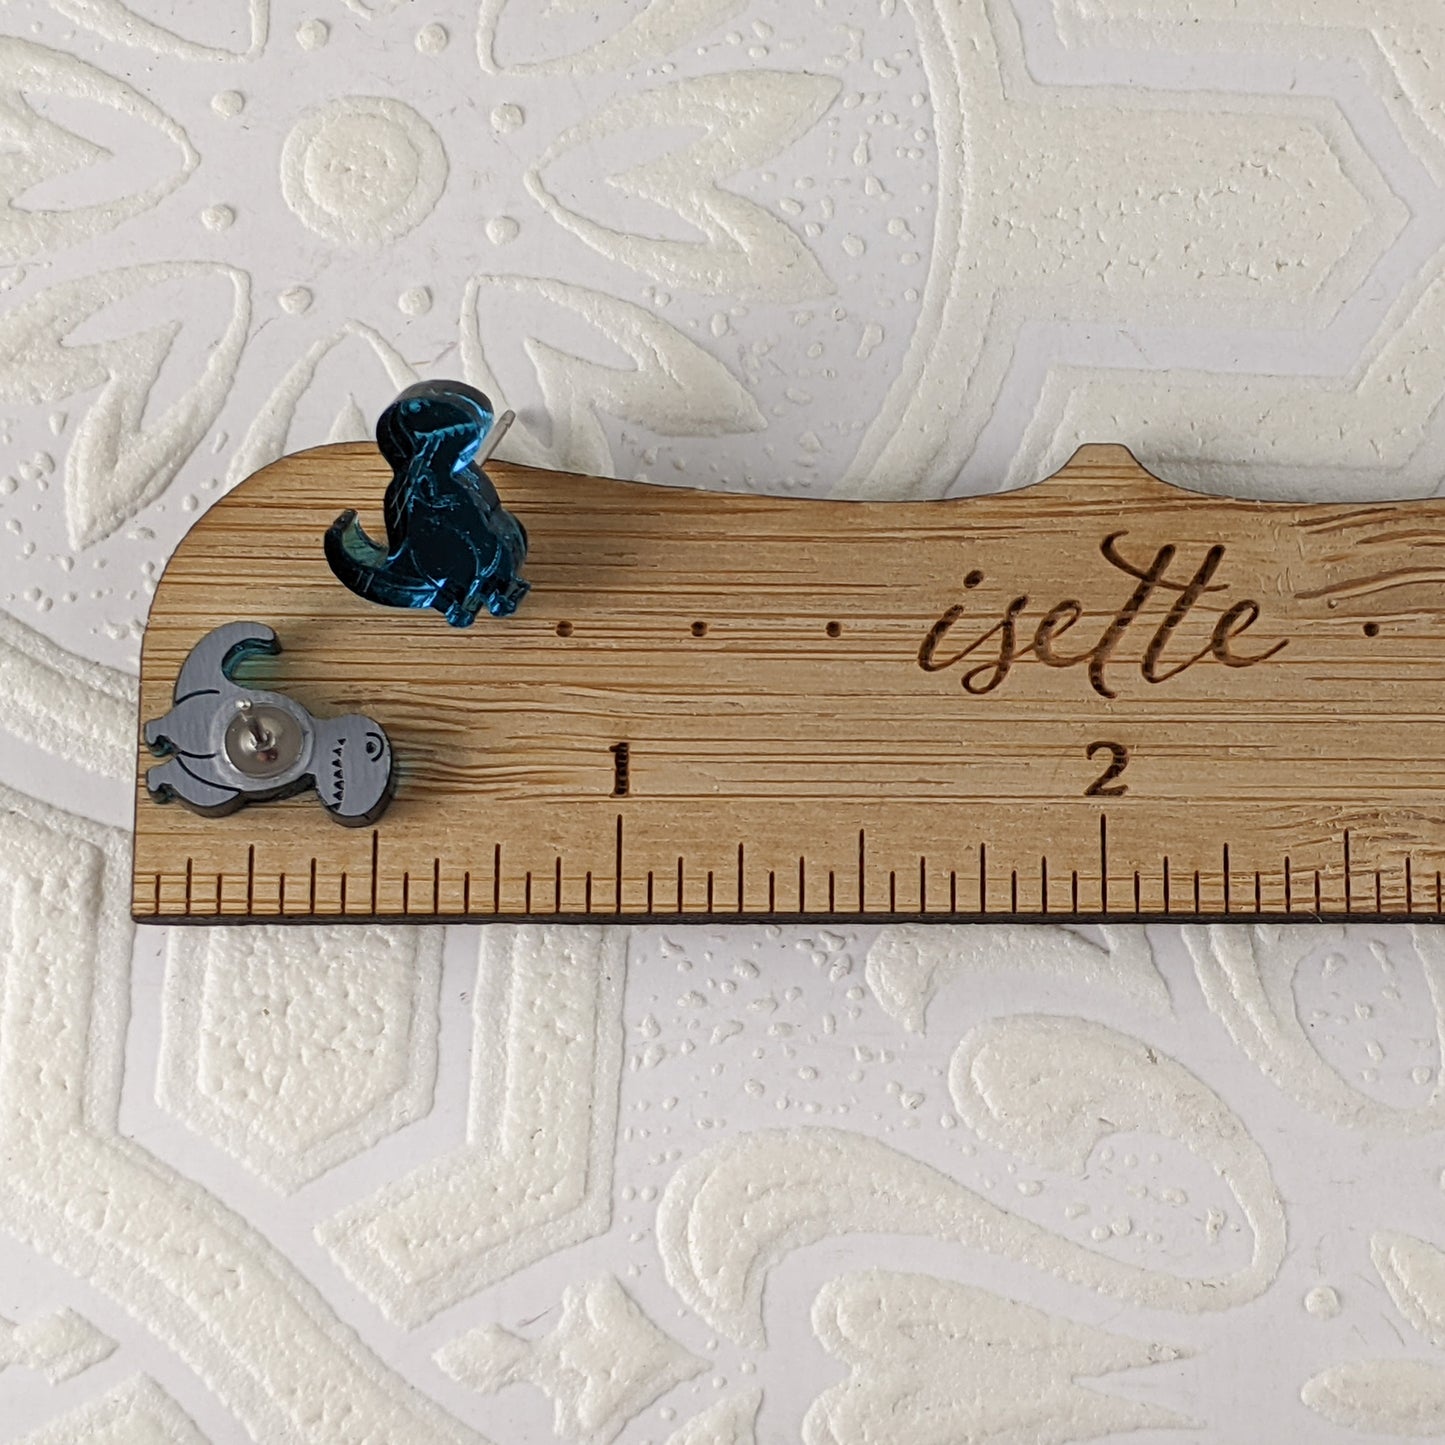 oon Tyrannosaurus Rex stud earrings in teal mirrored acrylic. They are photographed with one standing, one face down, on a wooden ruler, and measure .5 inches.  By Isette.